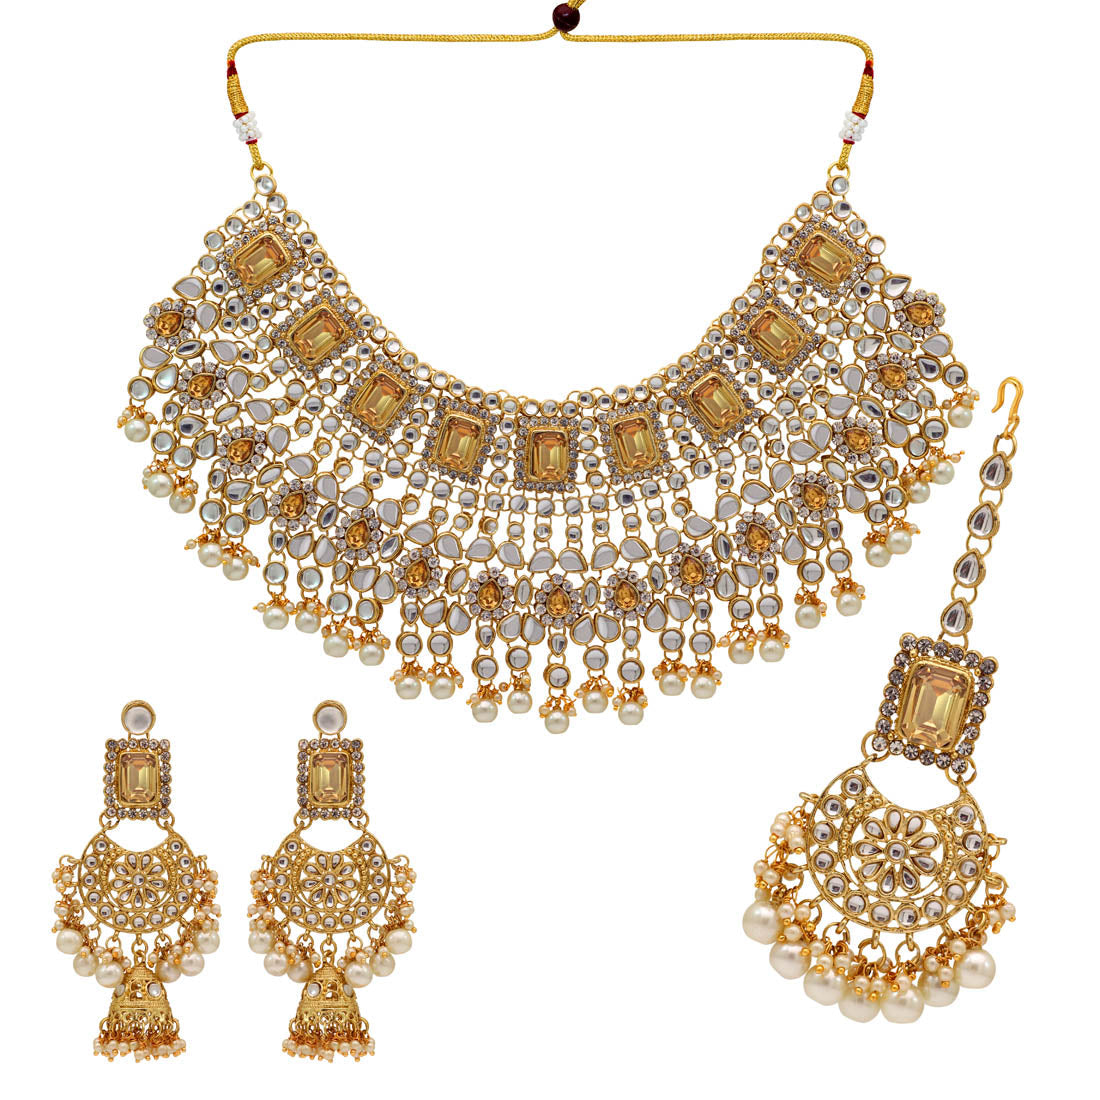 Gold Color Kundan Necklace With Earrings & Maang Tikka (KN222GLD) Jewellery GetGlit   